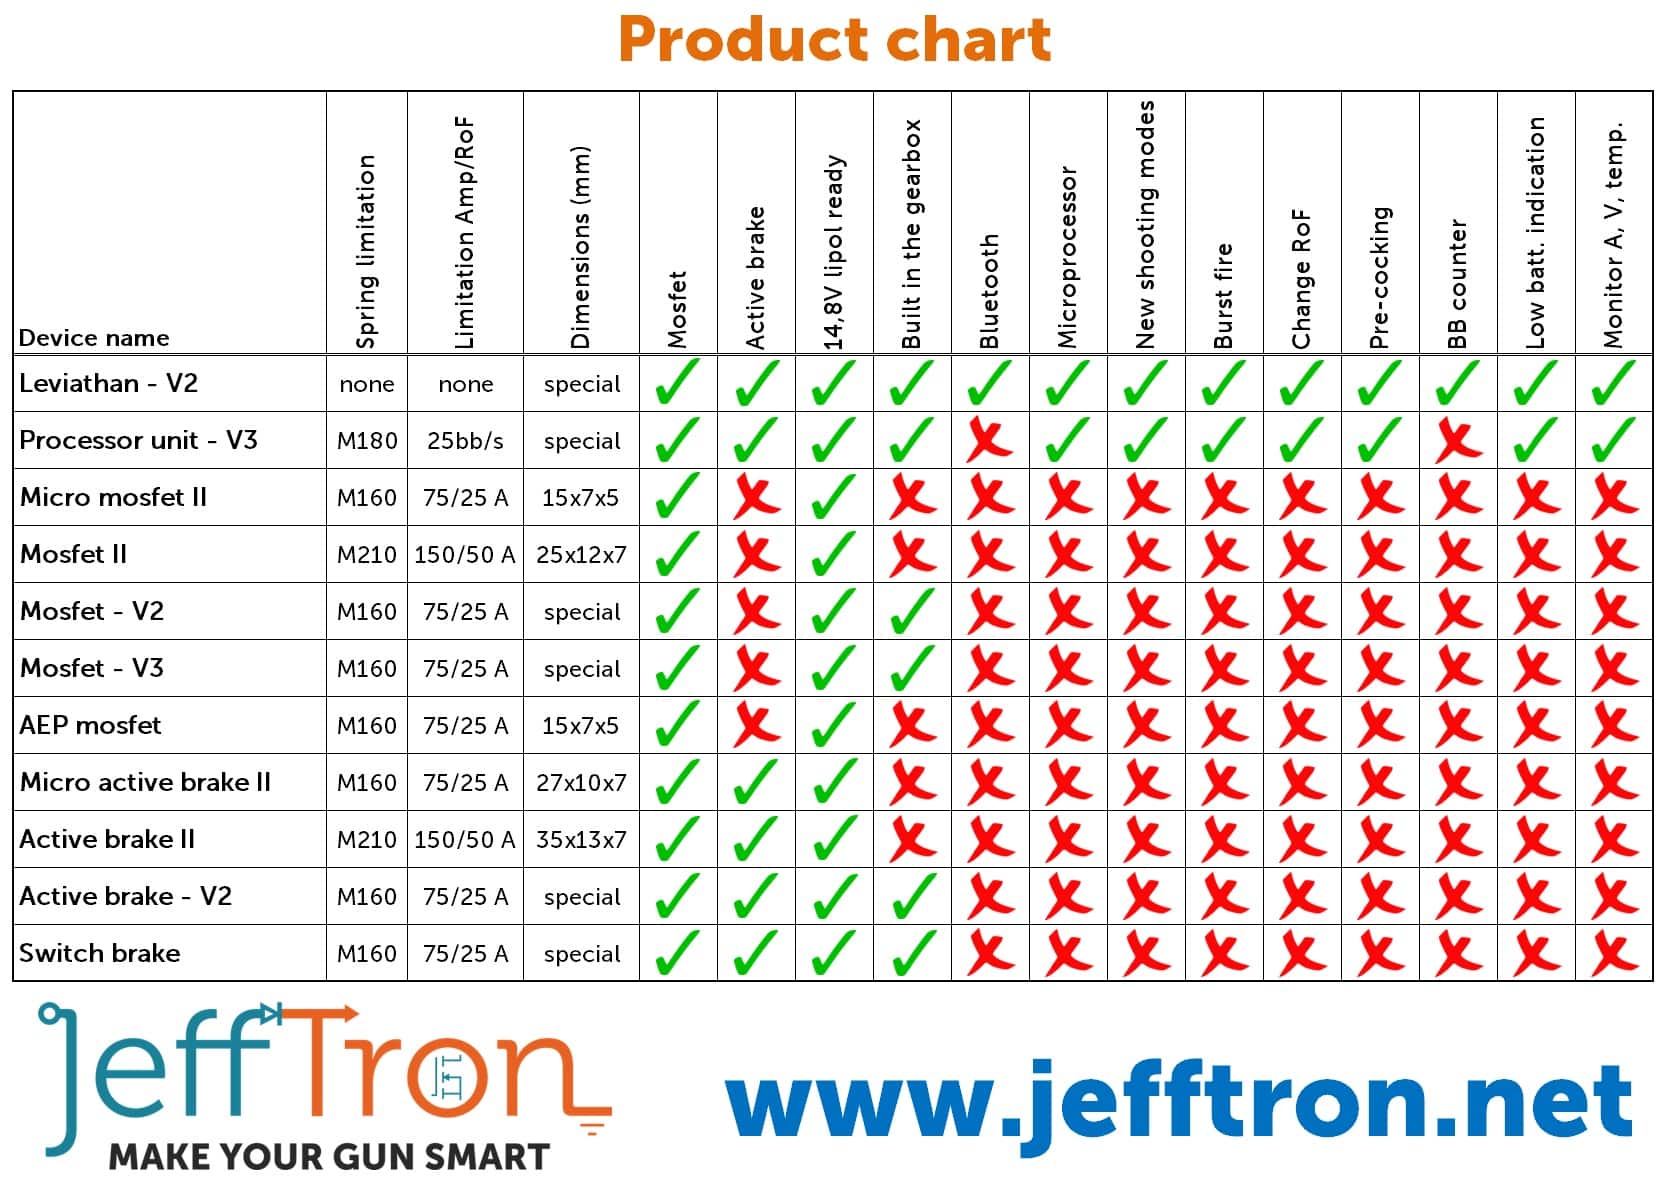 Jefftron Active brake - V2 Mosfet with wiring